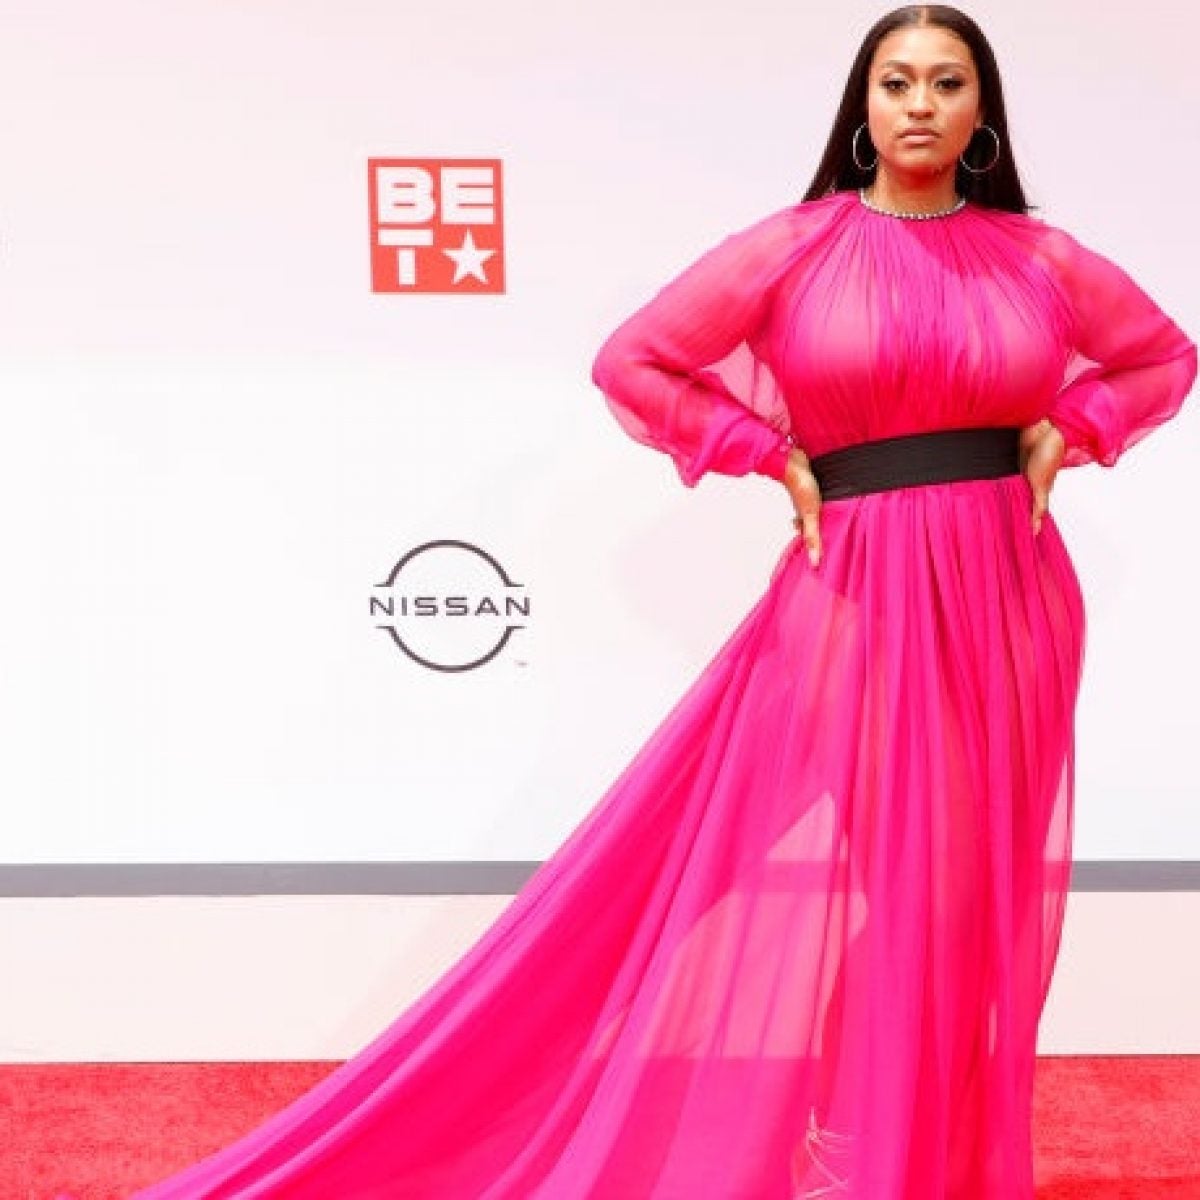 Jazmine Sullivan Says This Track From 'Heaux Tales' Is Her Theme Song For 2021